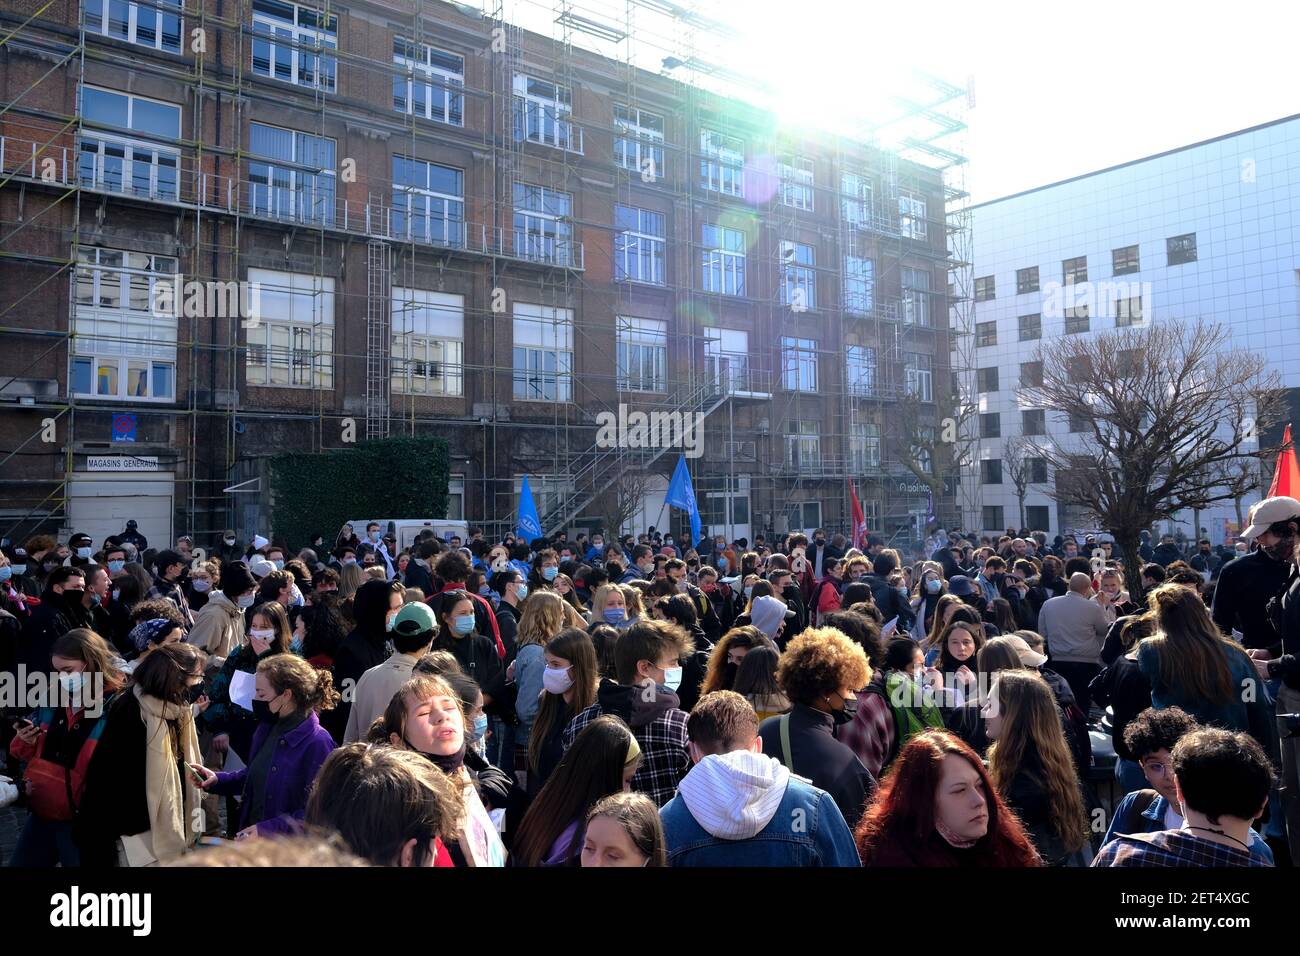 Brussels, Belgium. 01st Mar, 2021. Students gather to protest against isolation and precariousness at the Universite Libre de Bruxelles in Brussels, Belgium on March 1st, 2021. Credit: ALEXANDROS MICHAILIDIS/Alamy Live News Stock Photo